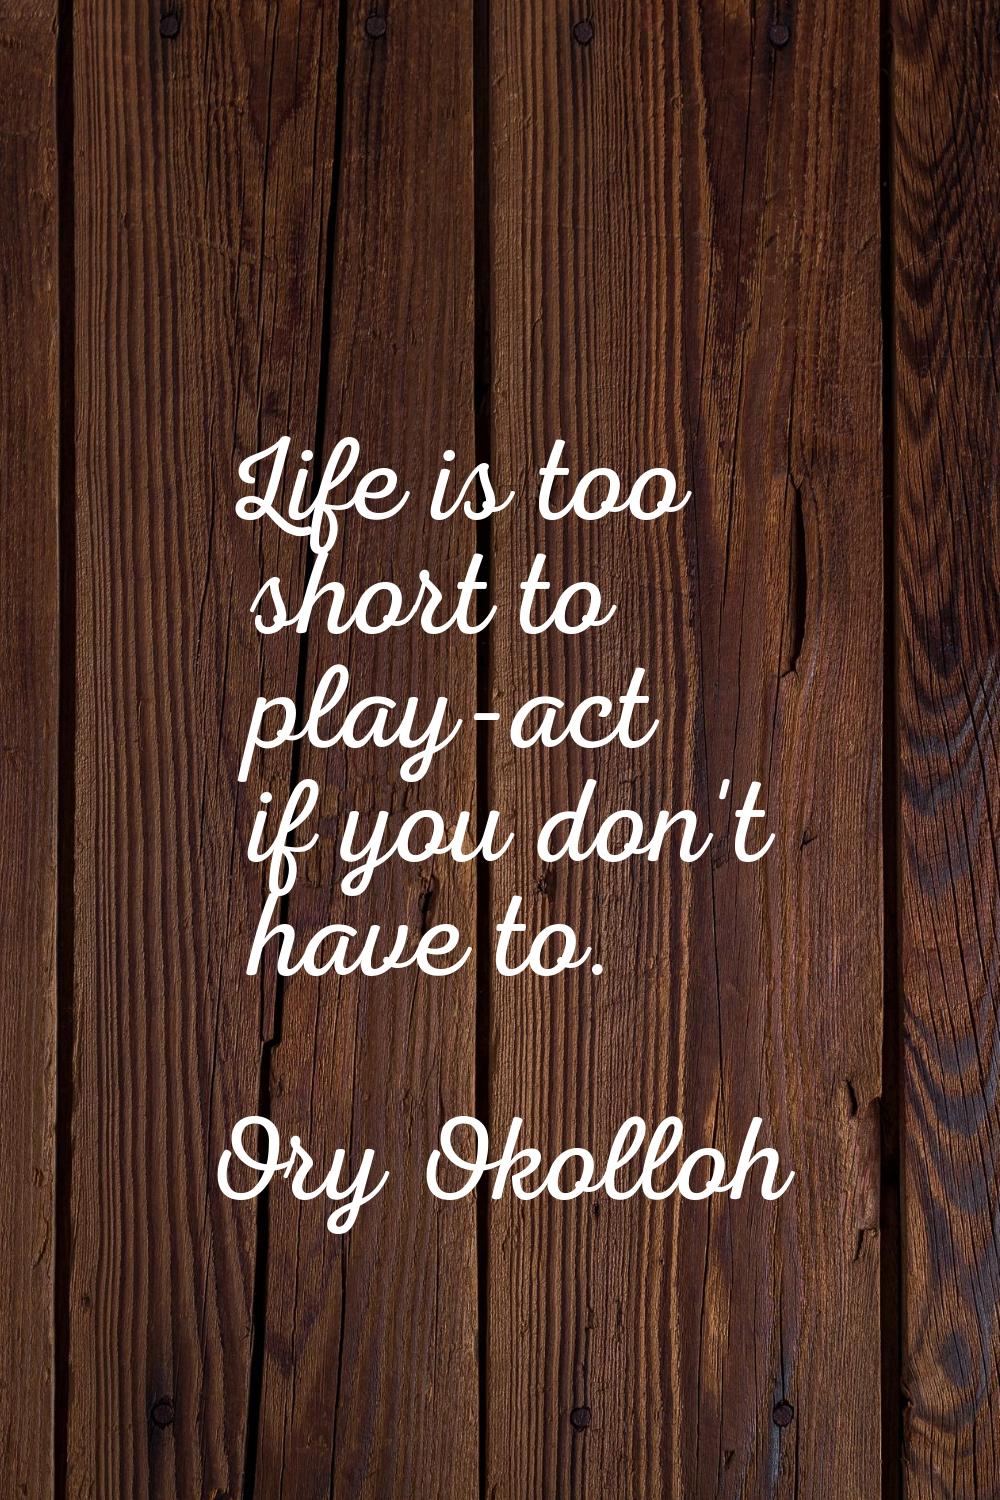 Life is too short to play-act if you don't have to.